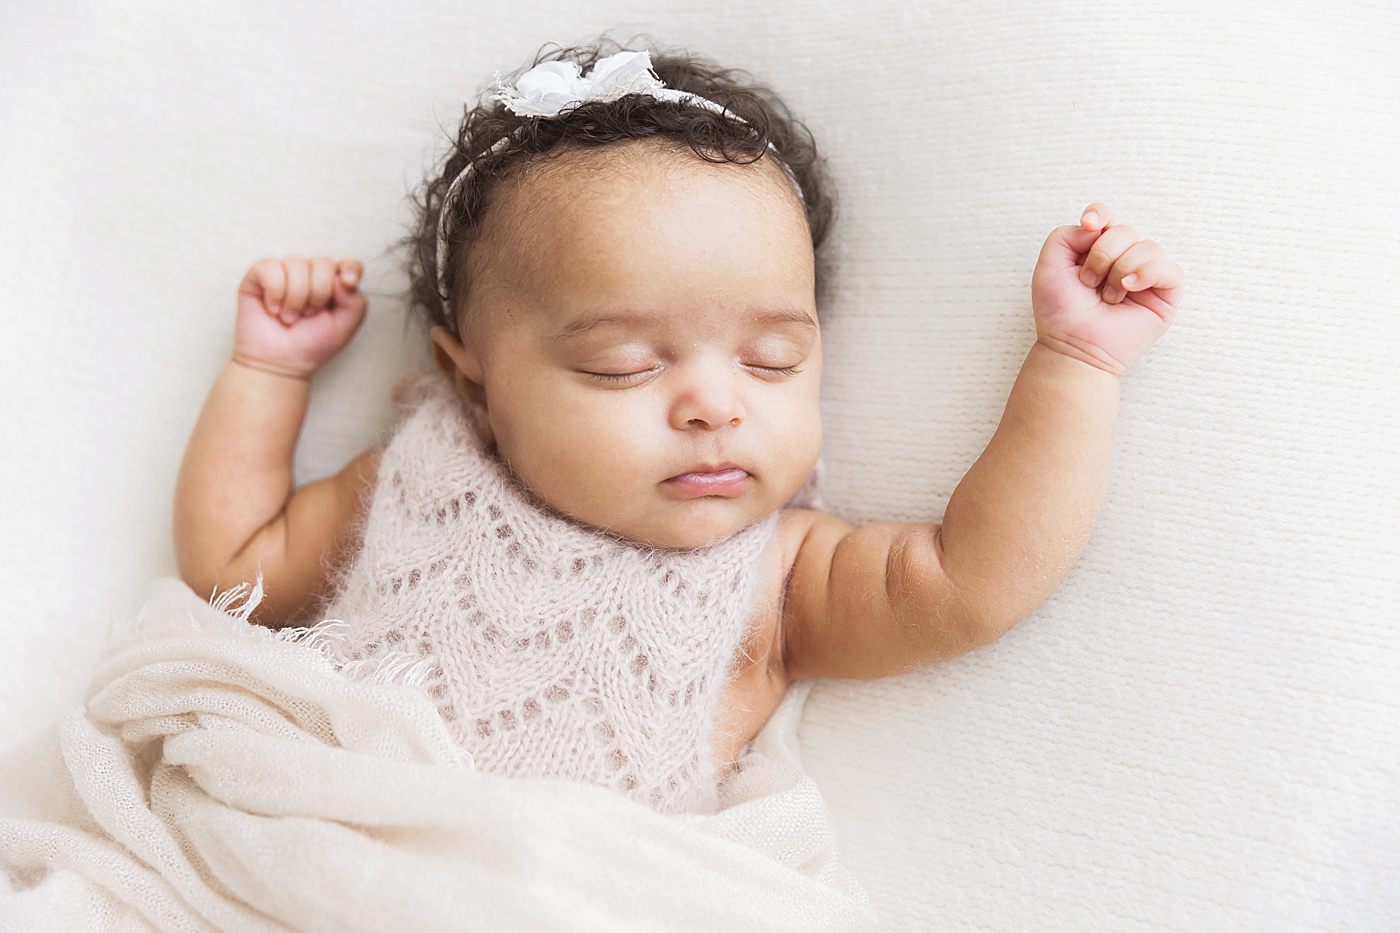 Sleeping baby girl at newborn session. Photo by Fresh Light Photography.